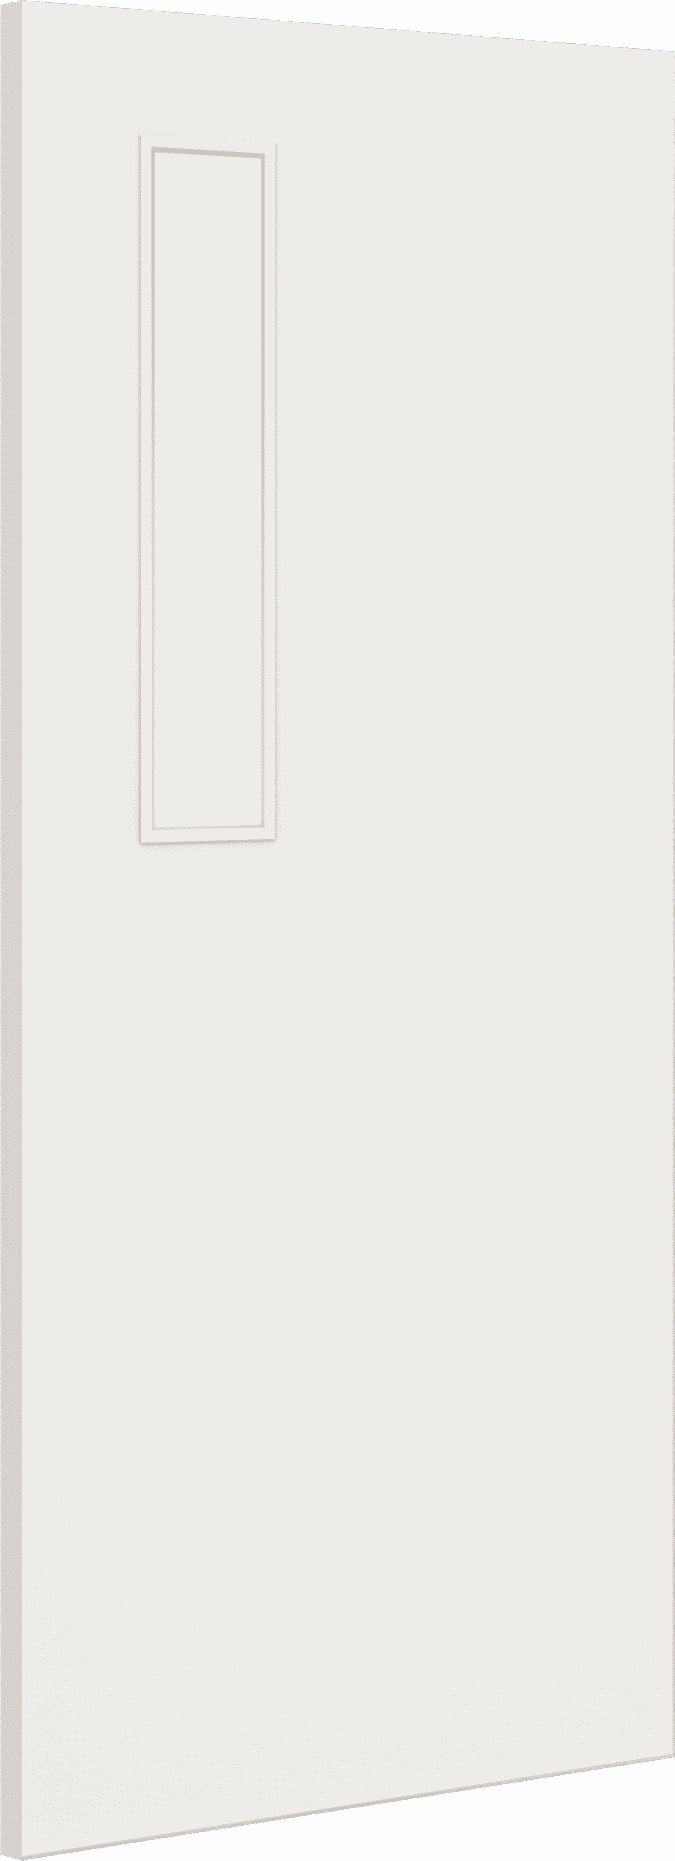 1981mm x 914mm x 44mm (36") Architectural Paint Grade White 08 Frosted Glazed Fire Door Blank